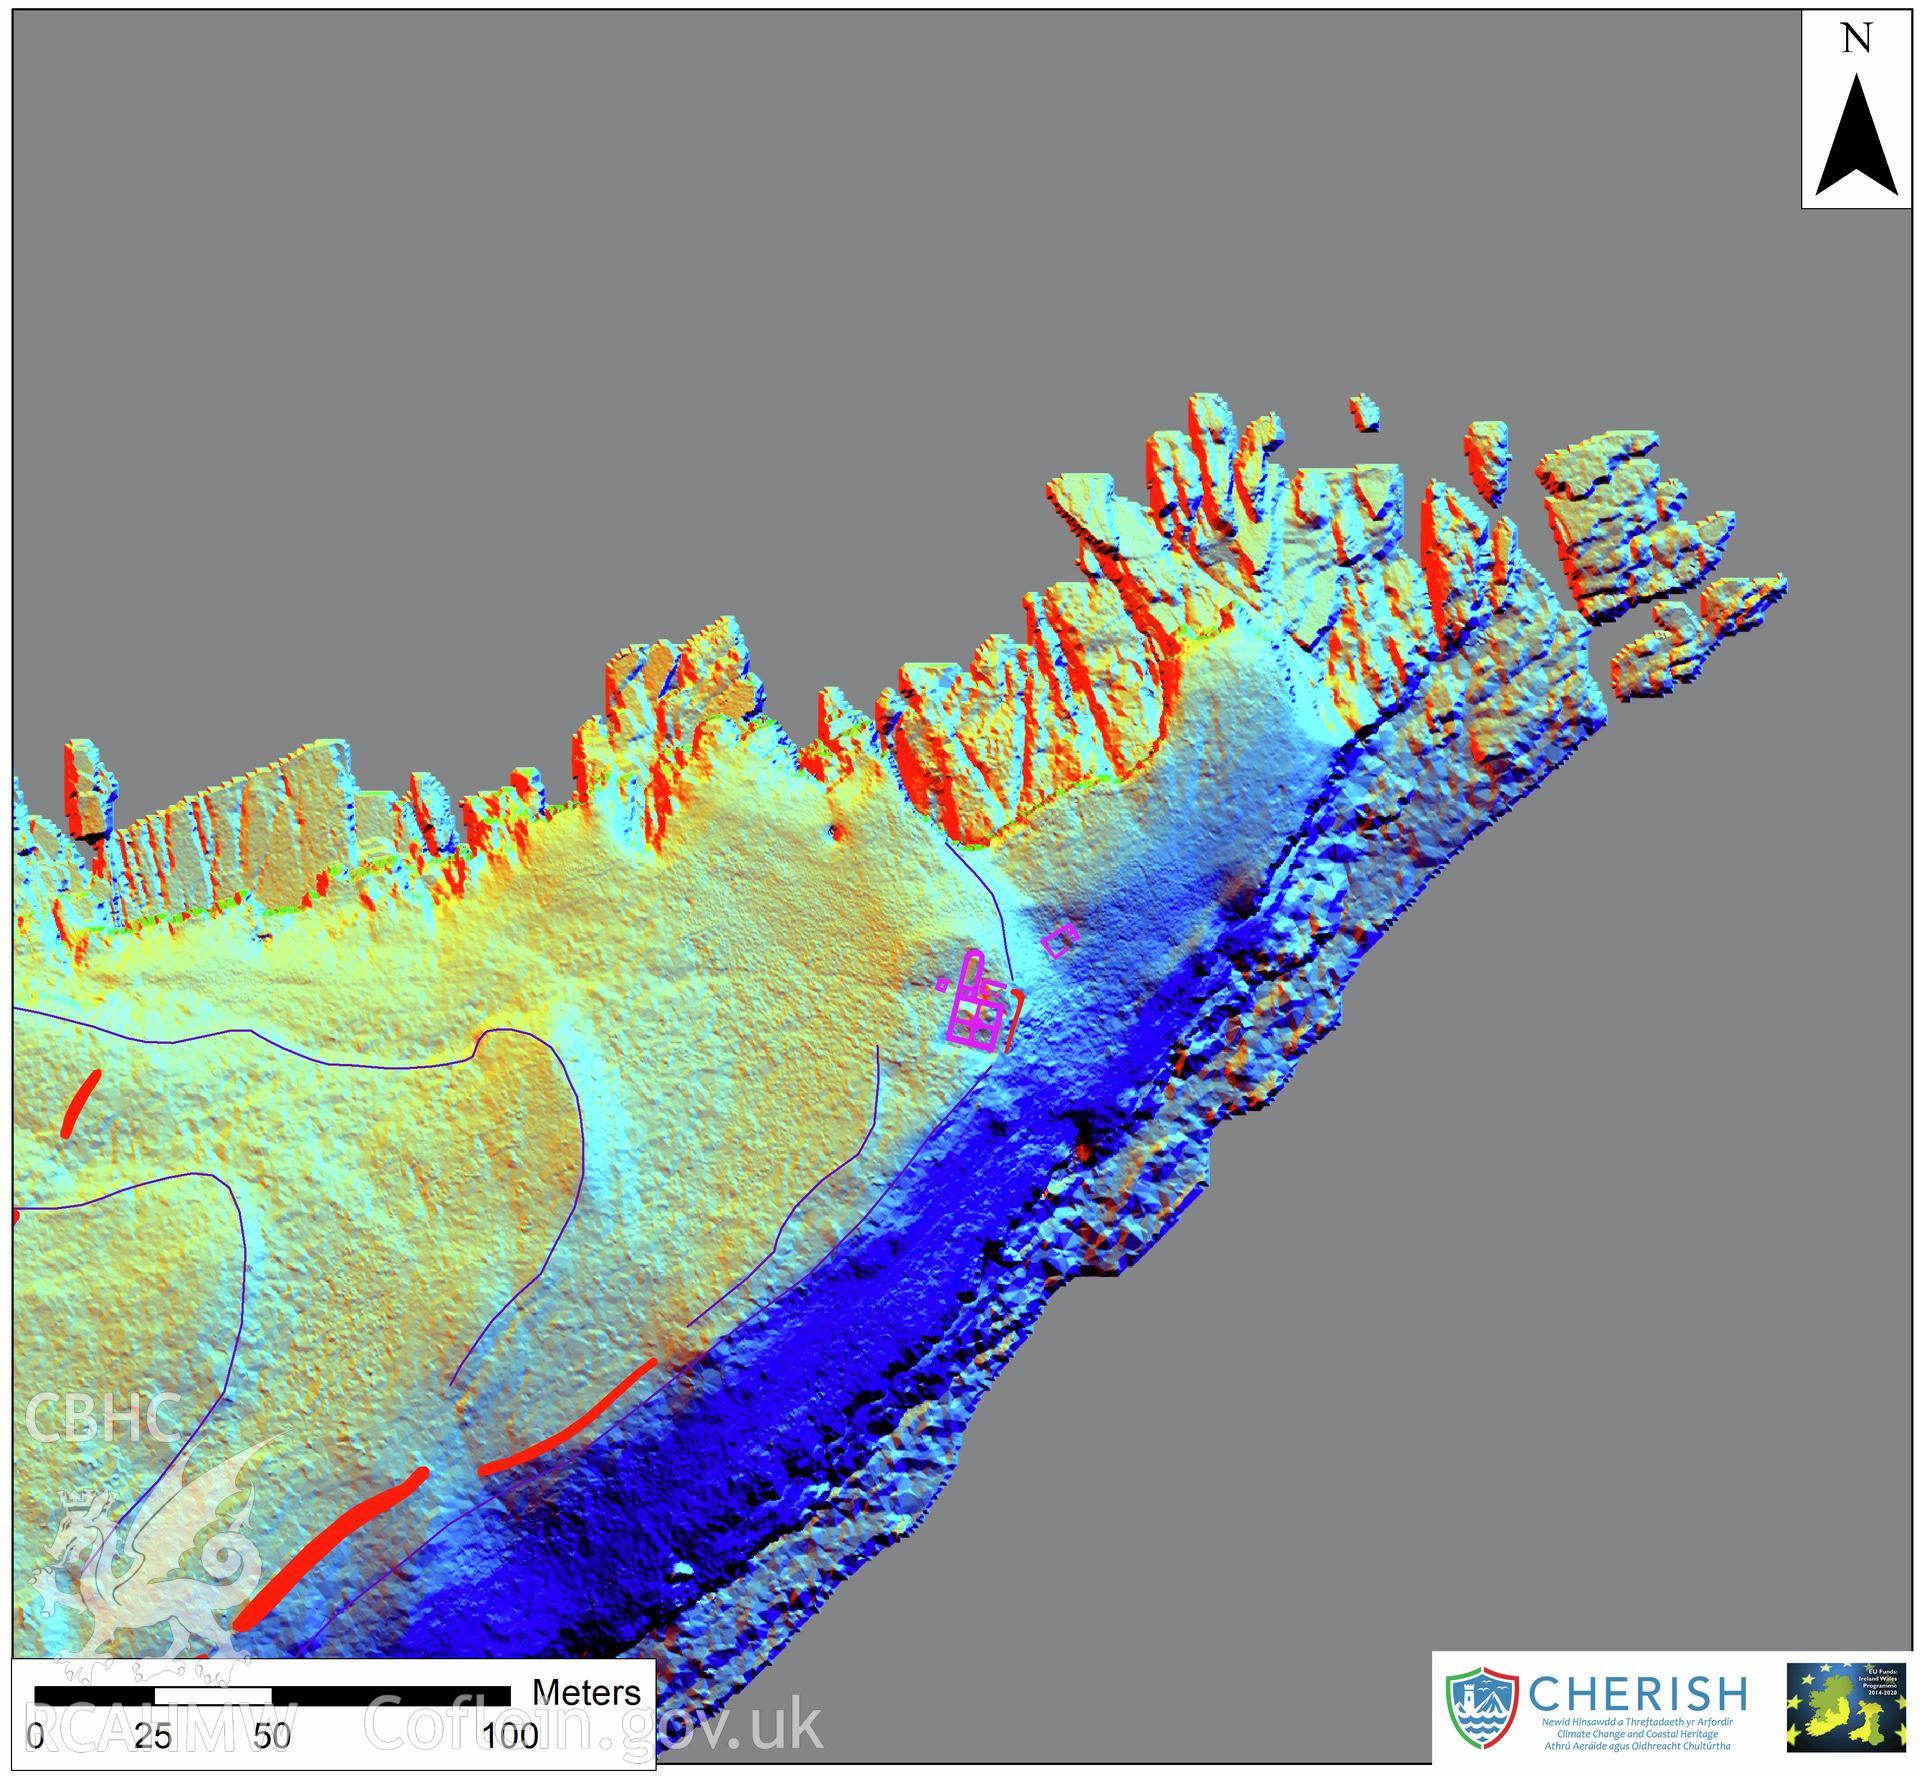 Ynys Seiriol (Puffin Island). Airborne laser scanning (LiDAR) commissioned by the CHERISH Project 2017-2021, flown by Bluesky International LTD at low tide on 24th February 2017. Digital Terrain Model (DTM) showing North part of the island with multi hill shading and aerial mapping highlighting the telegraph station.